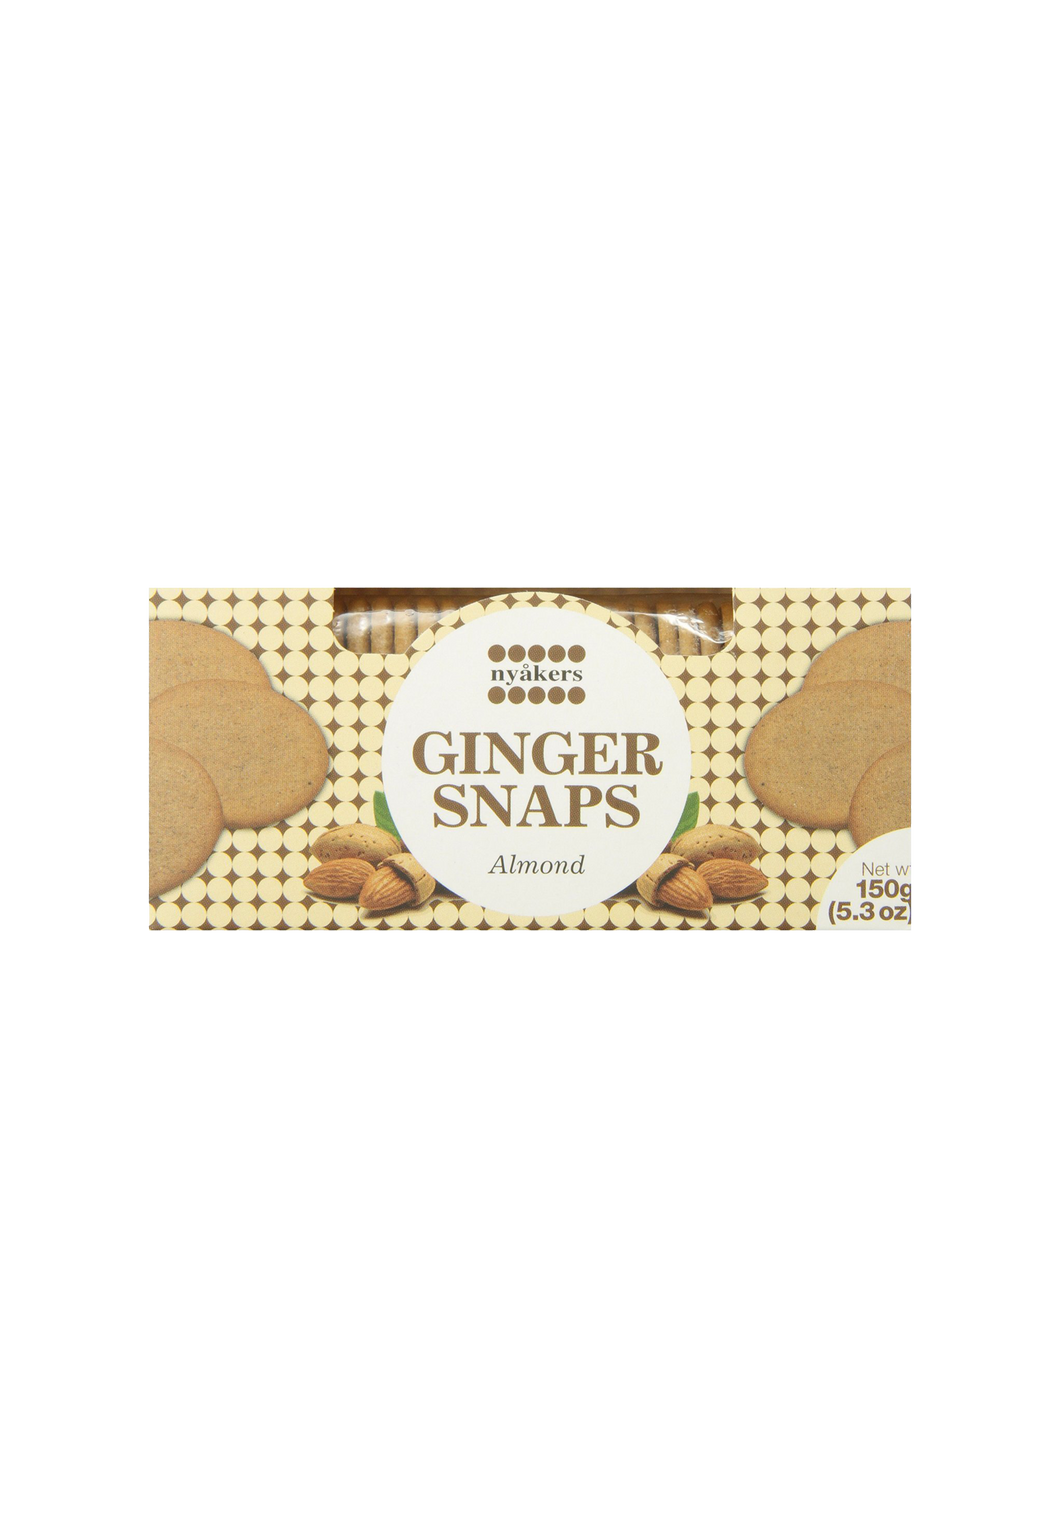 Nyakers Ginger Snaps Artificial Almond Flavor 150g